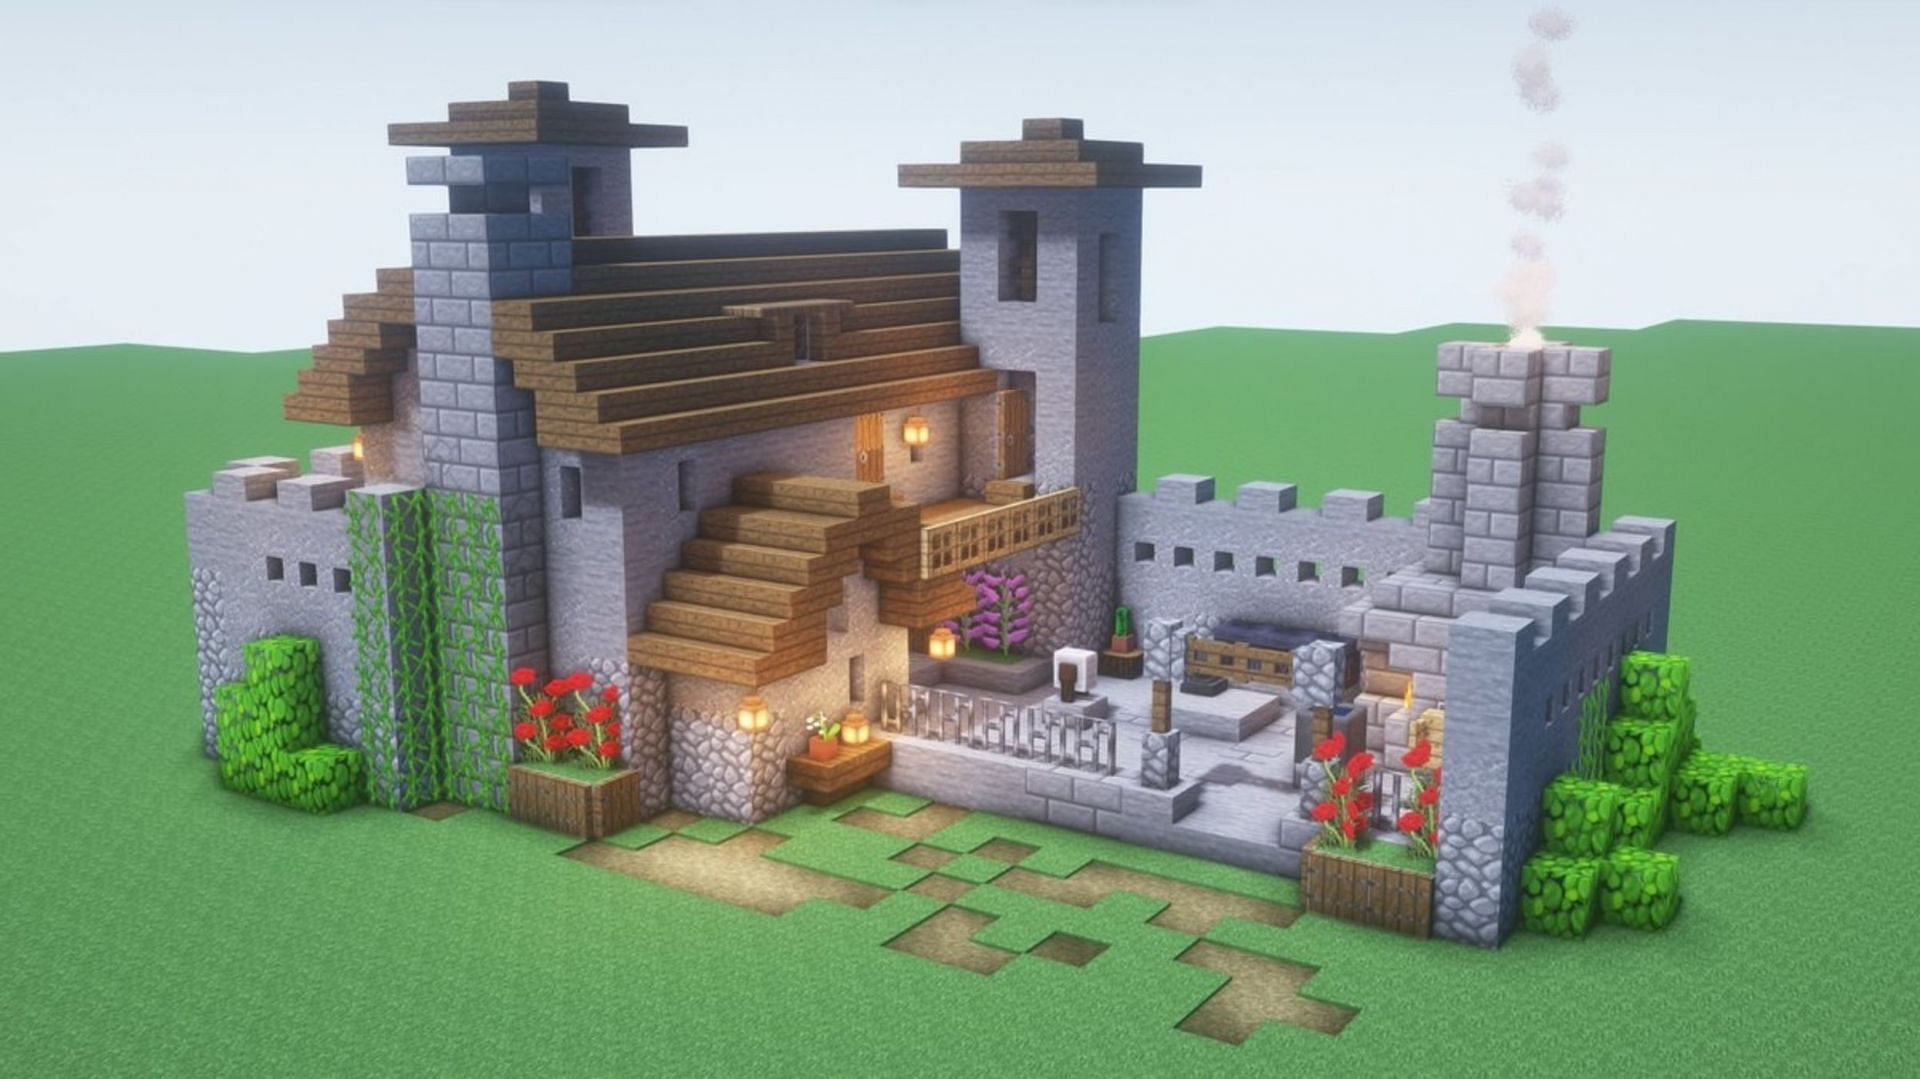 This house design comes courtesy of a well-known Minecraft builder (Image via @AndyisYoda/Twitter)